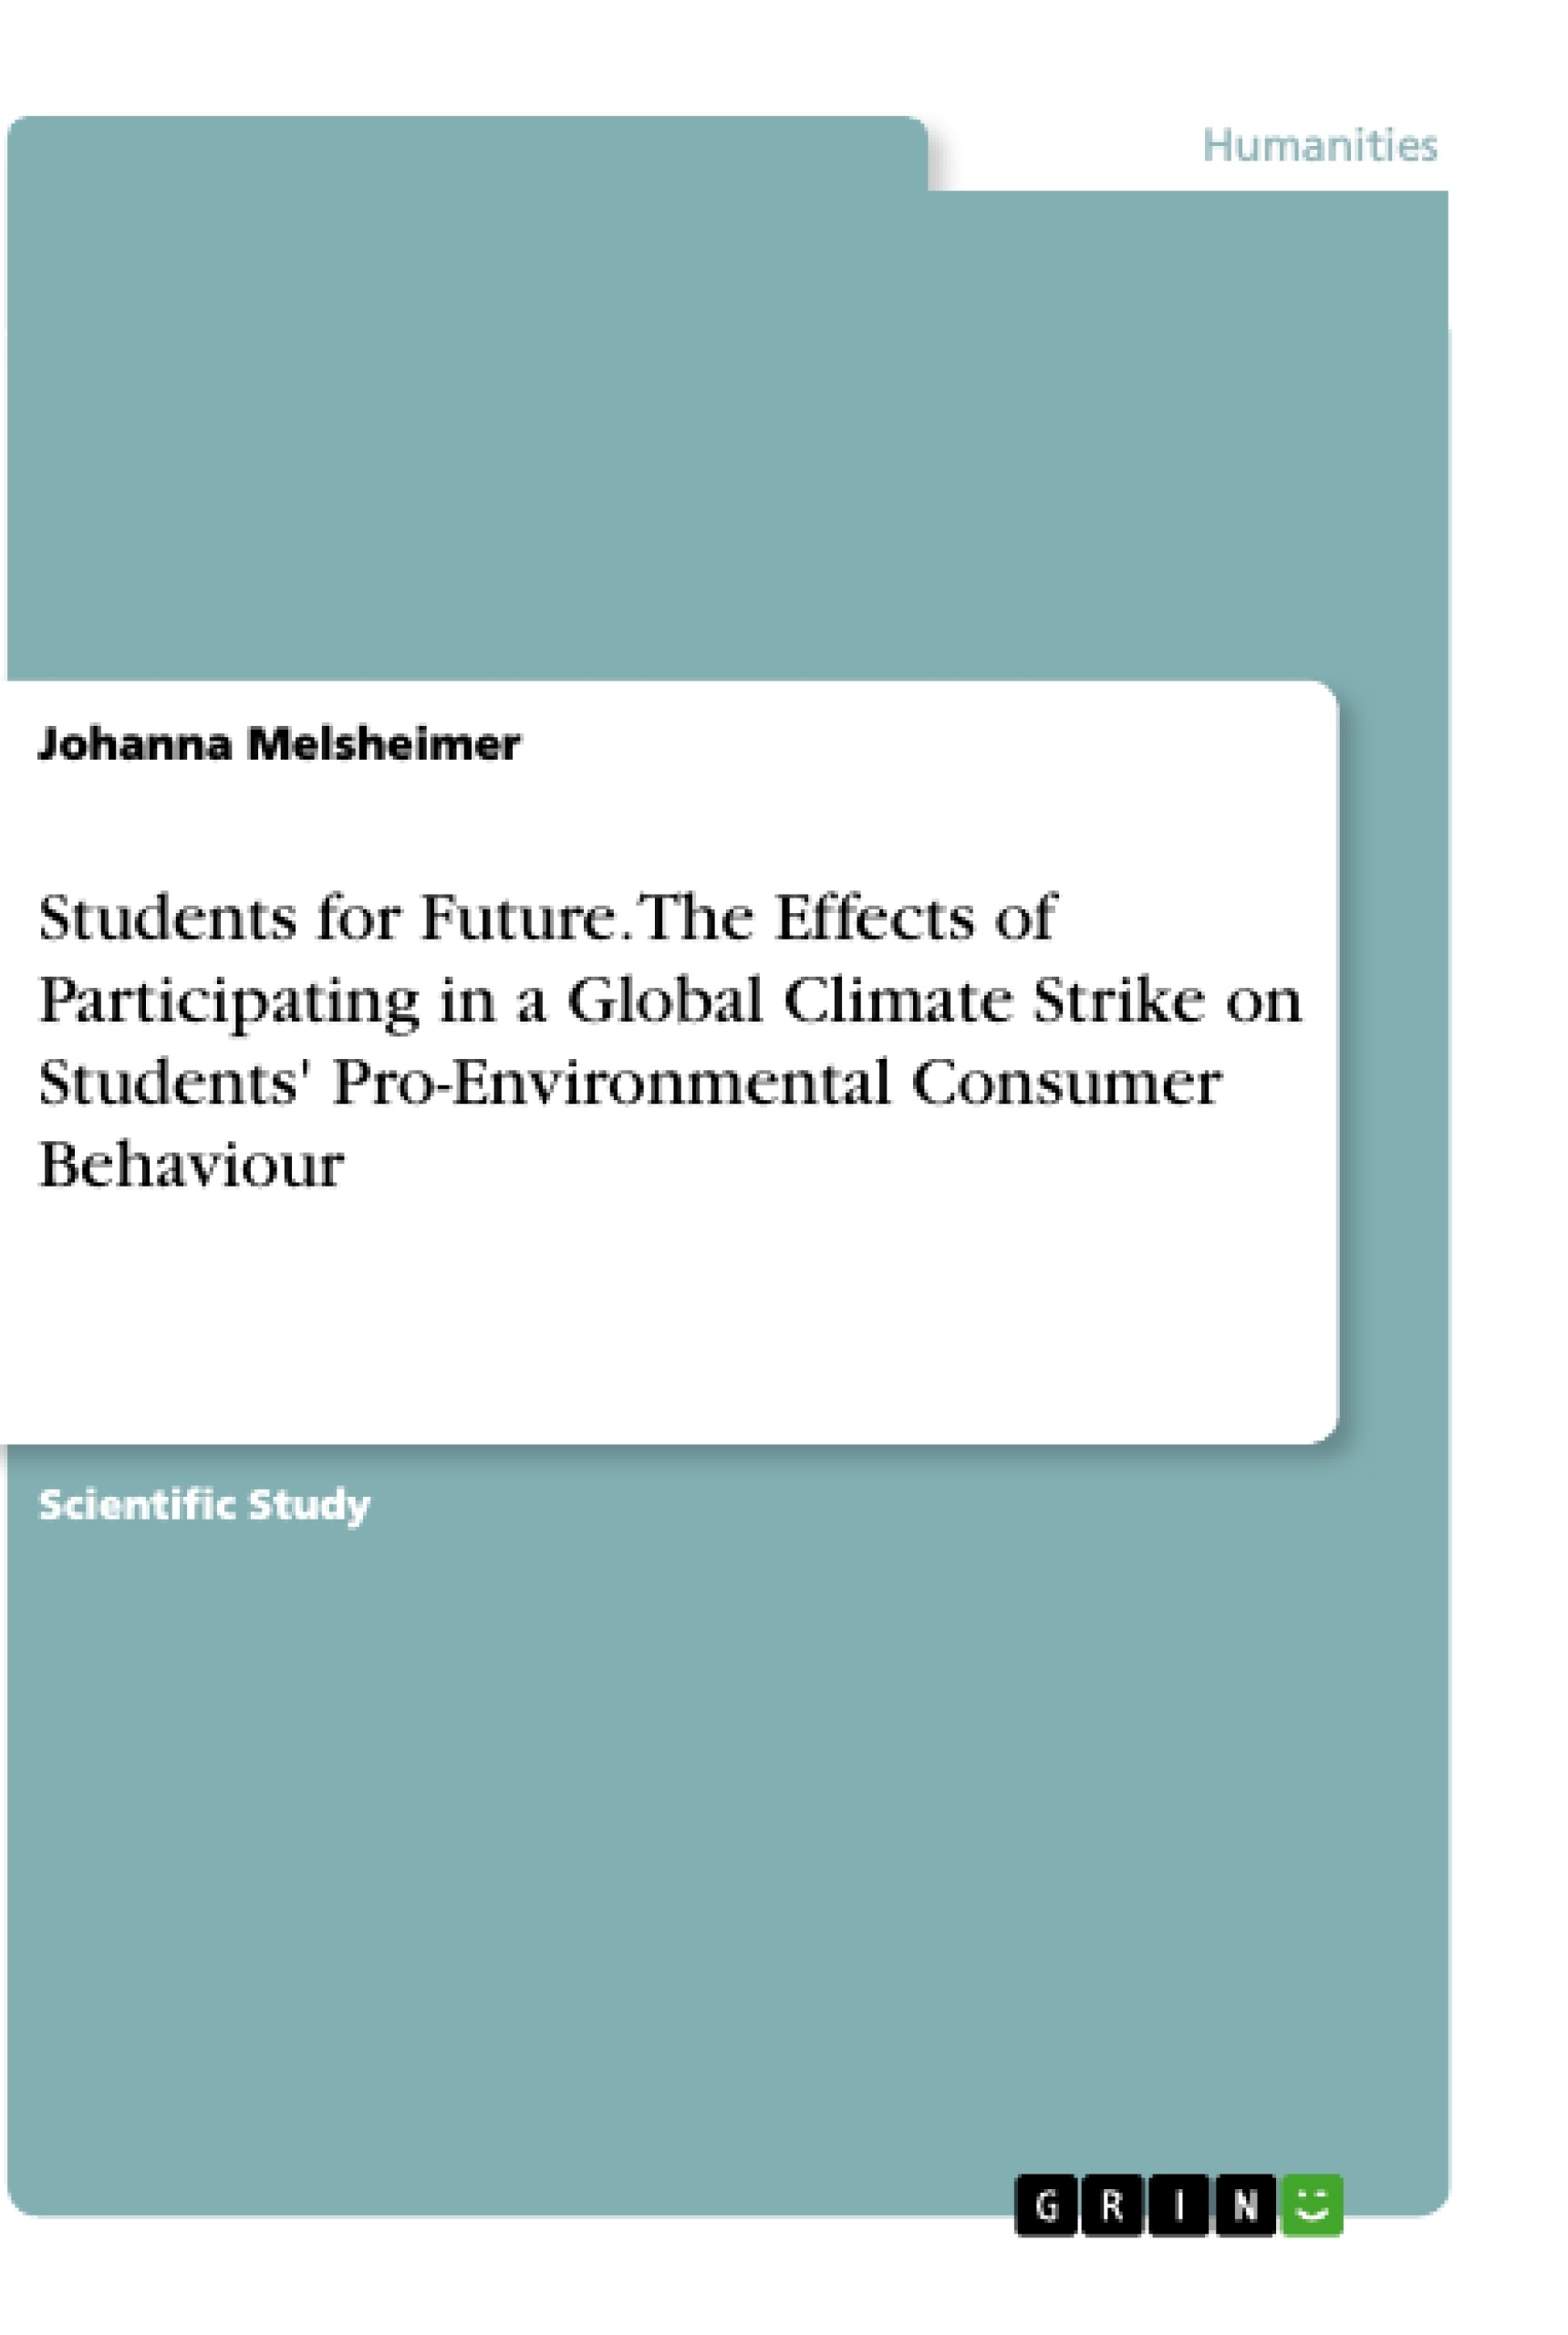 Titel: Students for Future. The Effects of Participating in a Global Climate Strike on Students' Pro-Environmental Consumer Behaviour